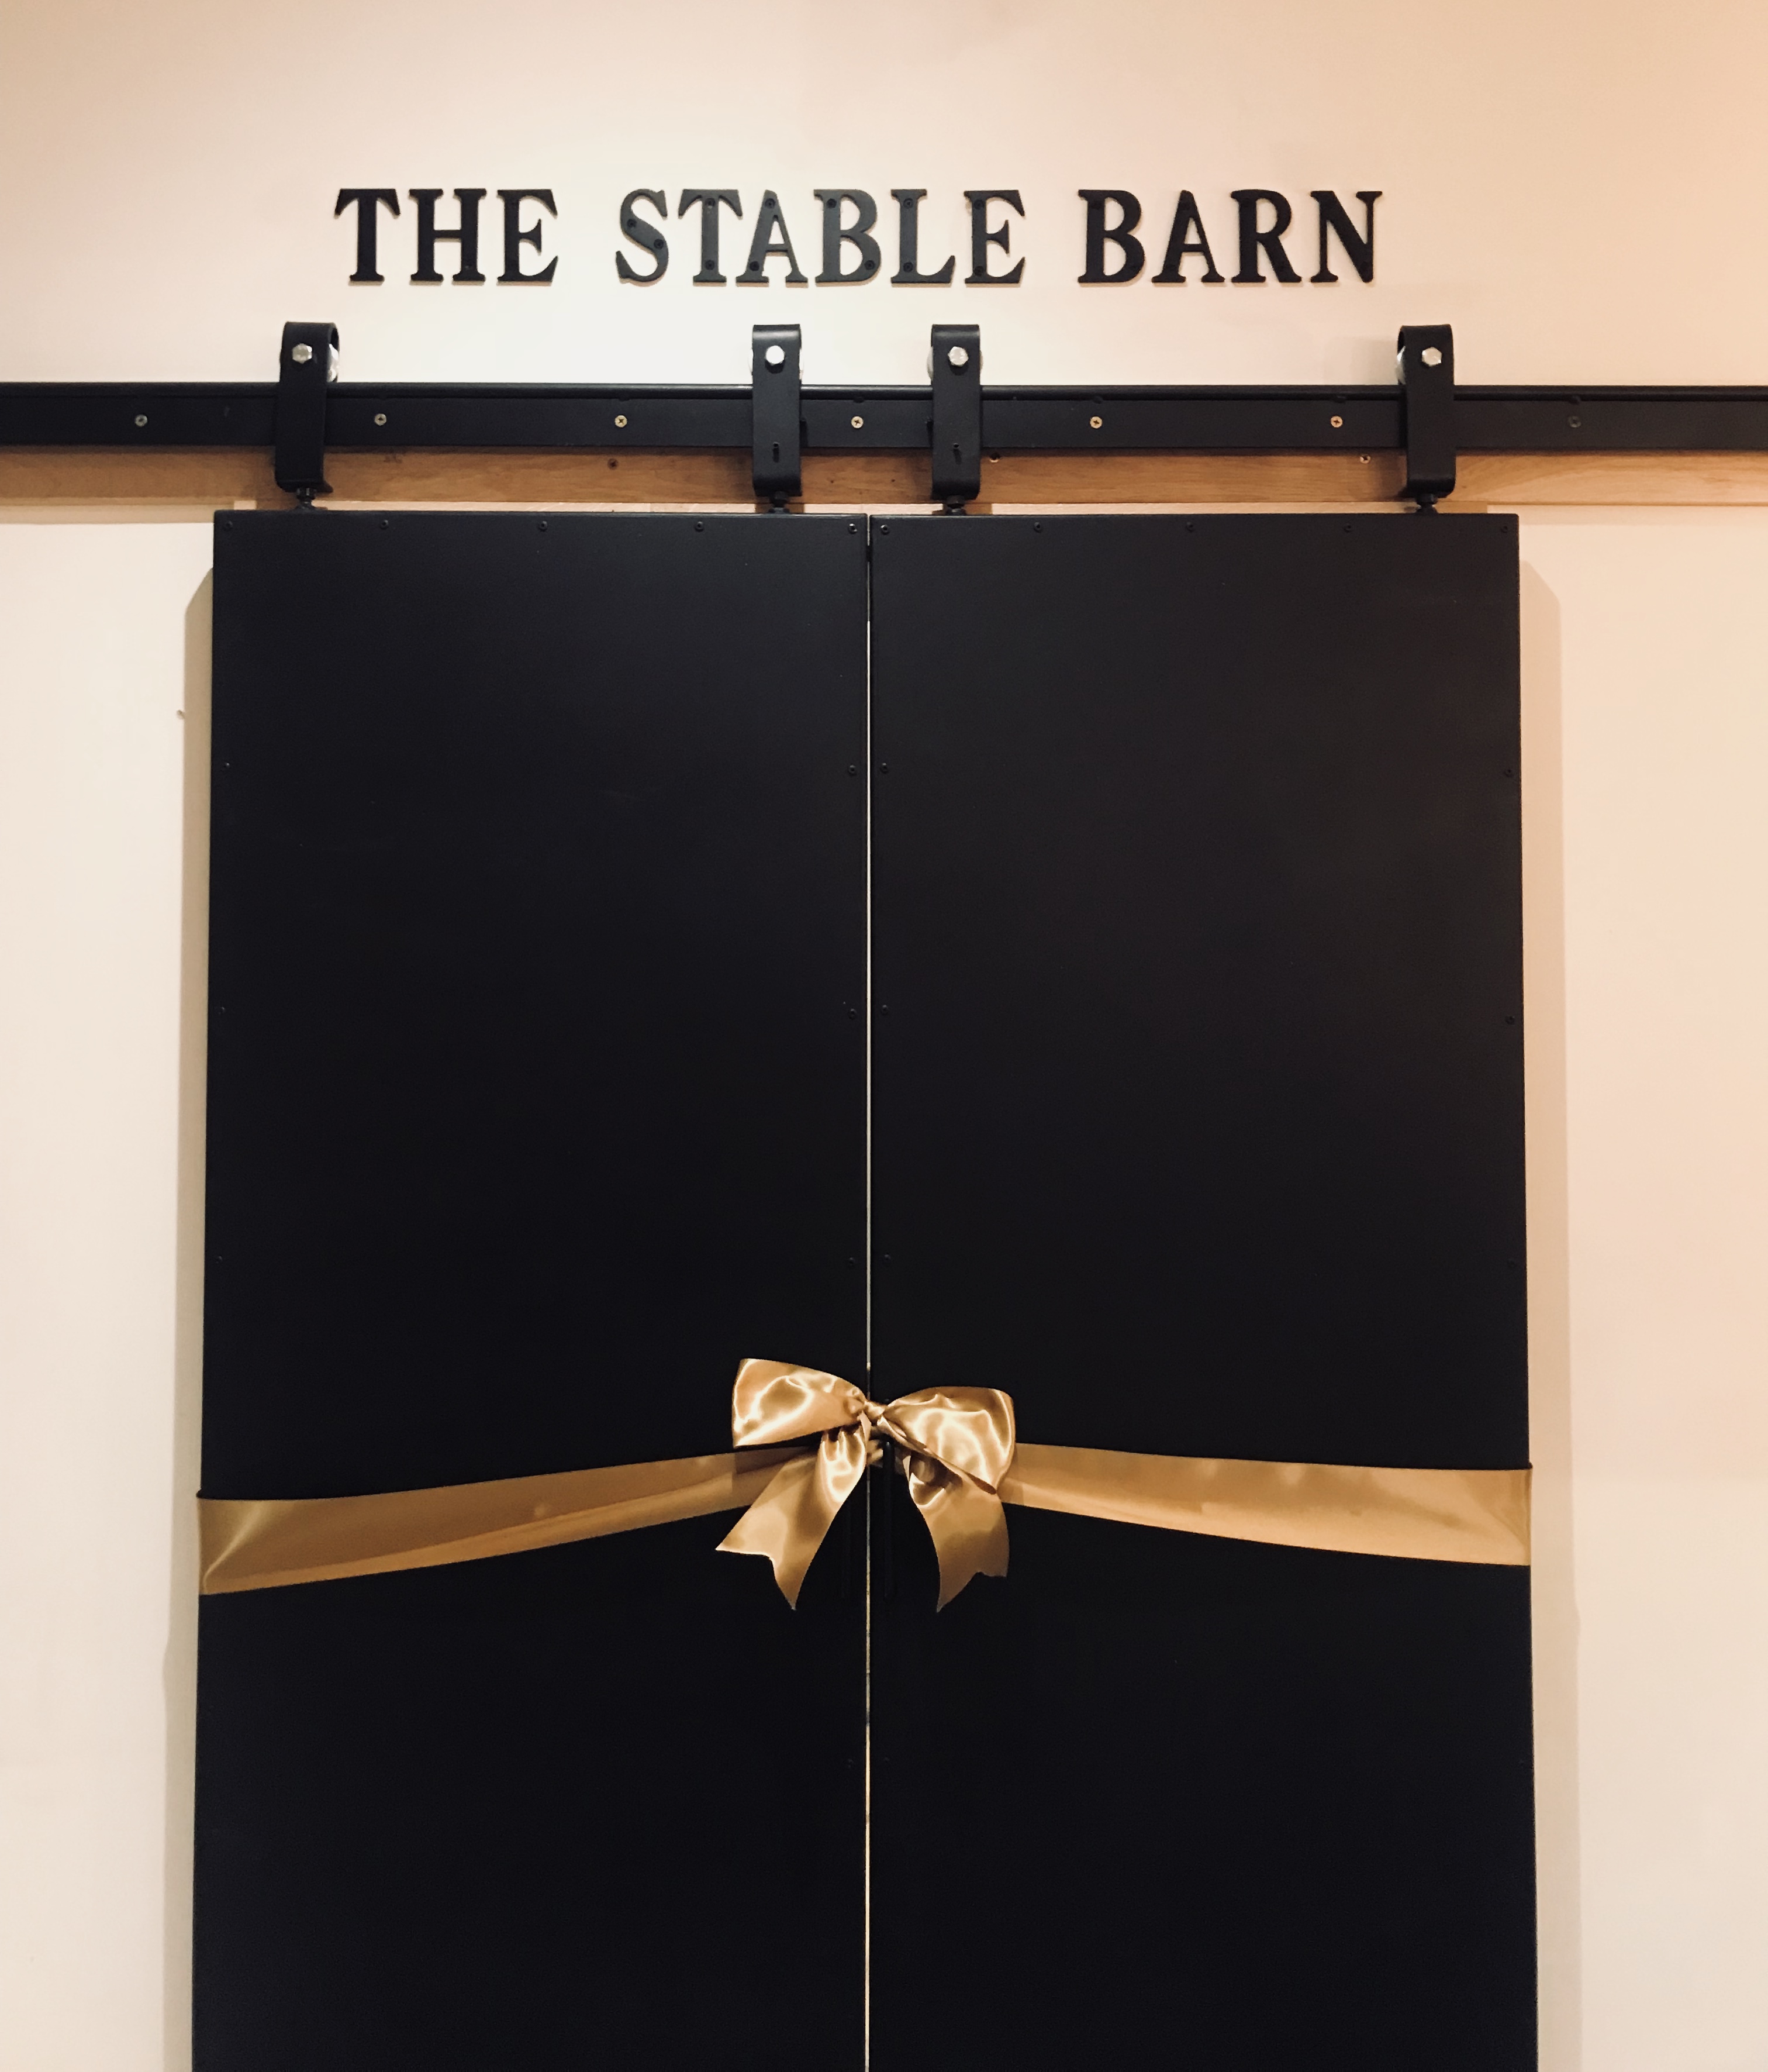 The Stable Barn opening at Upton Barn & Walled Garden